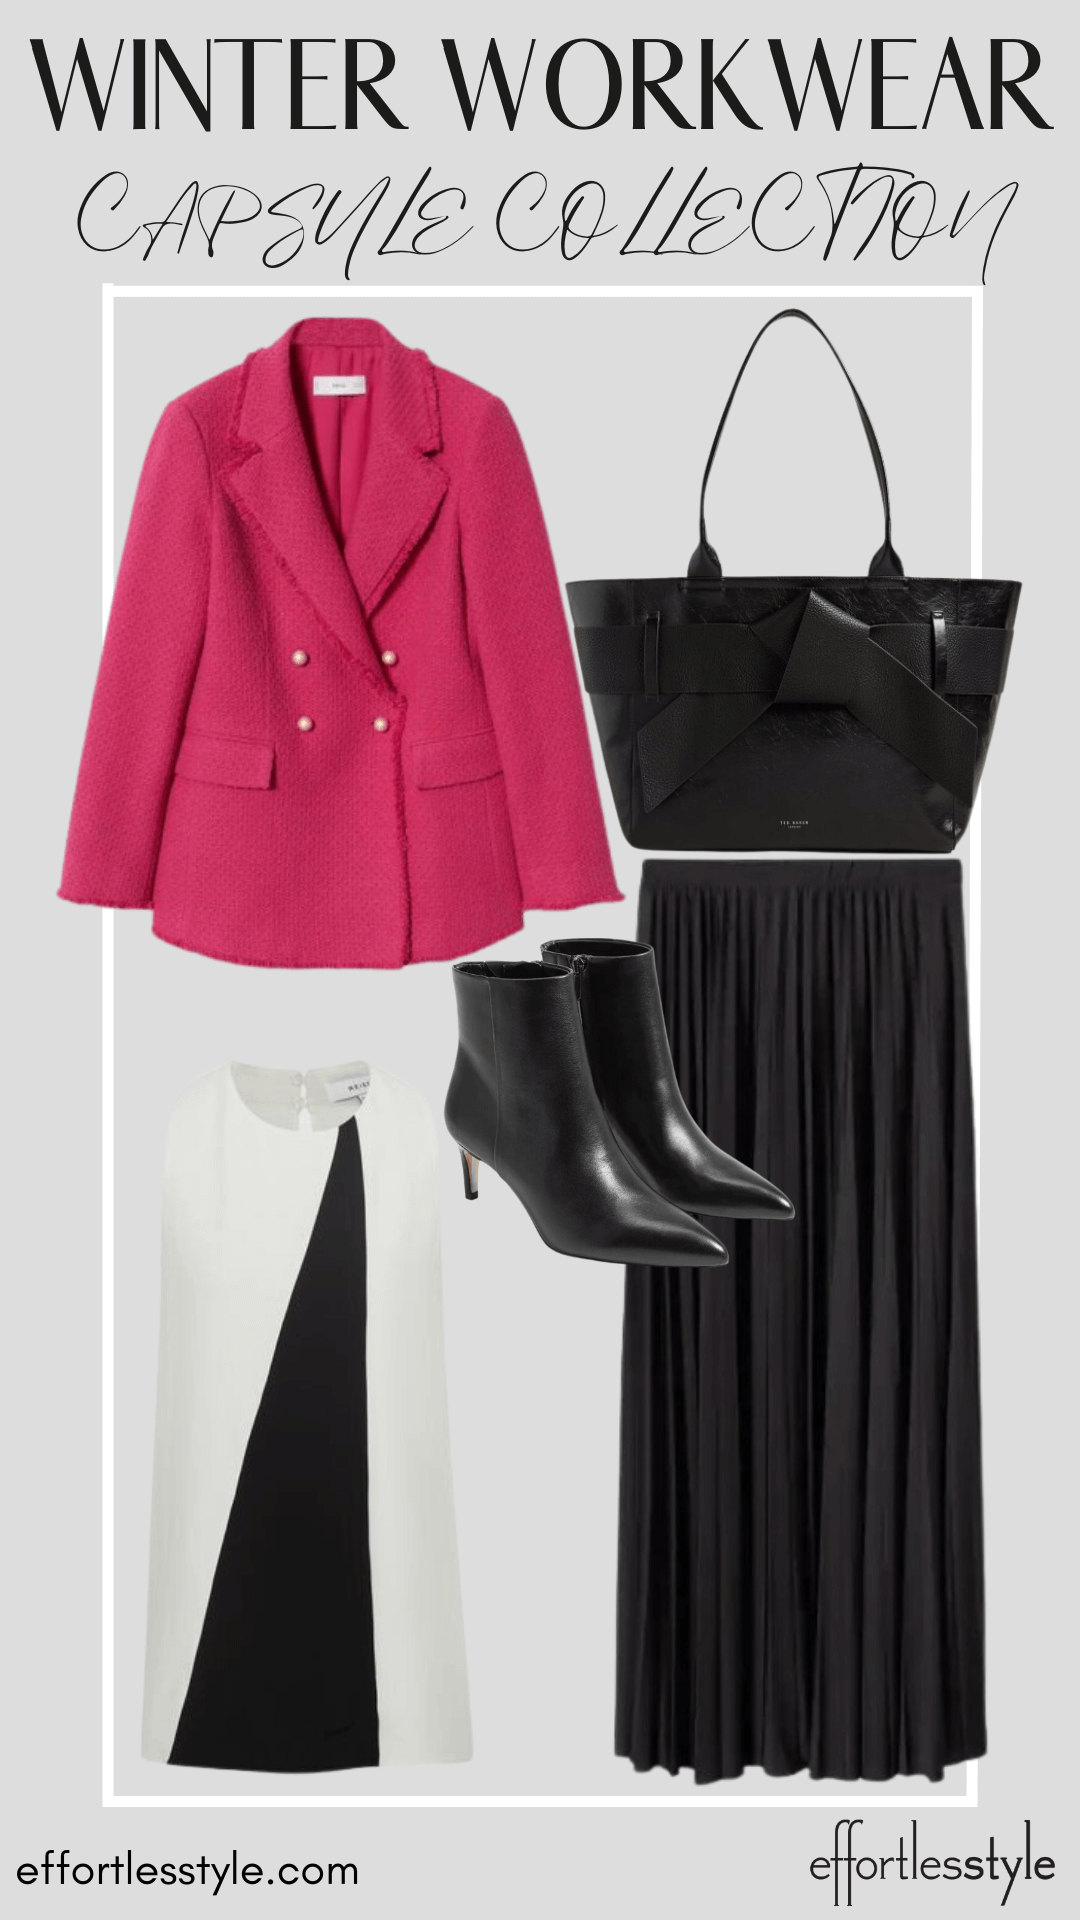 How To Wear Our Winter Workwear Capsule Wardrobe - Part 2 Sleeveless Blouse & Long Skirt & Statement Blazer how to wear a blazer with a long skirt how to wear bright pink to work how to style booties with a long skirt what shoes to wear with a long skirt the long skirt trend how to add a pop of color to your work look